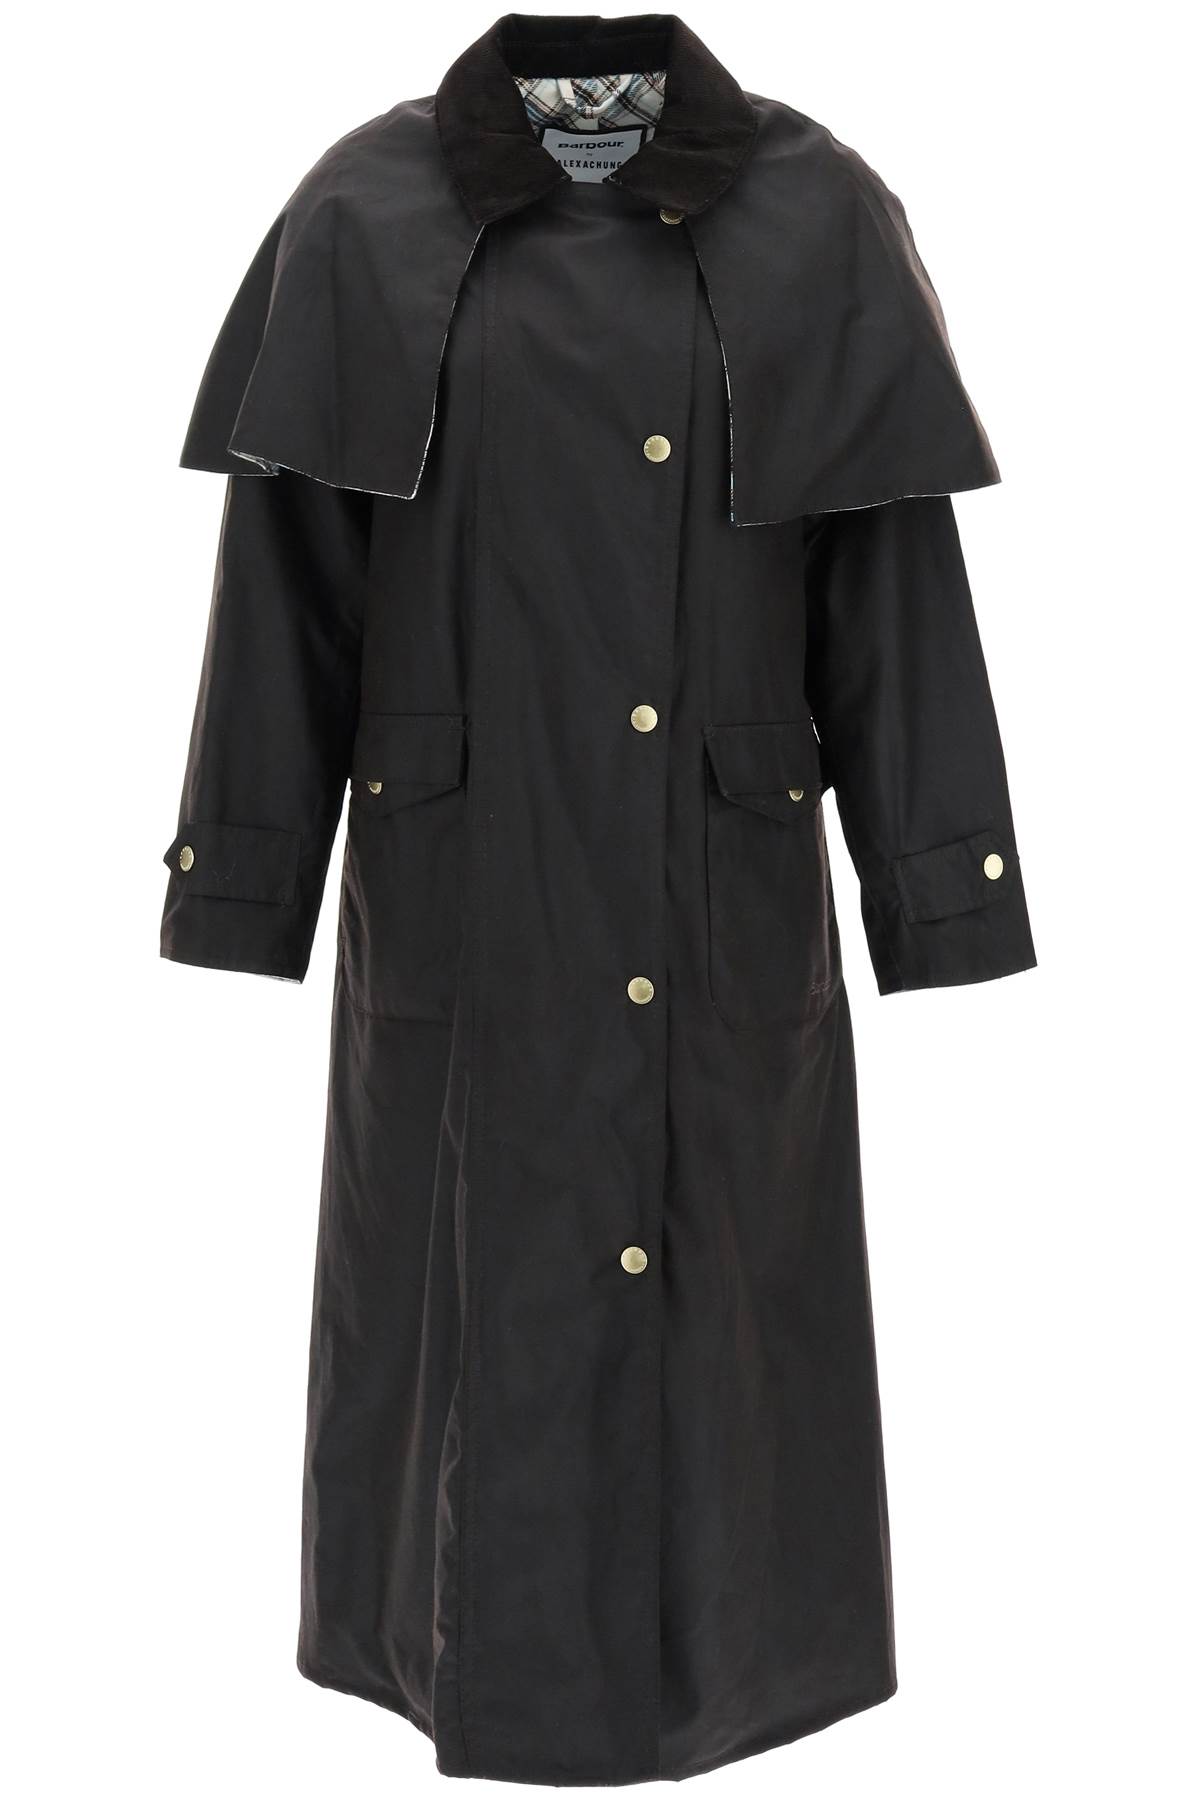 Barbour elizabeth Waxed Cotton Trench